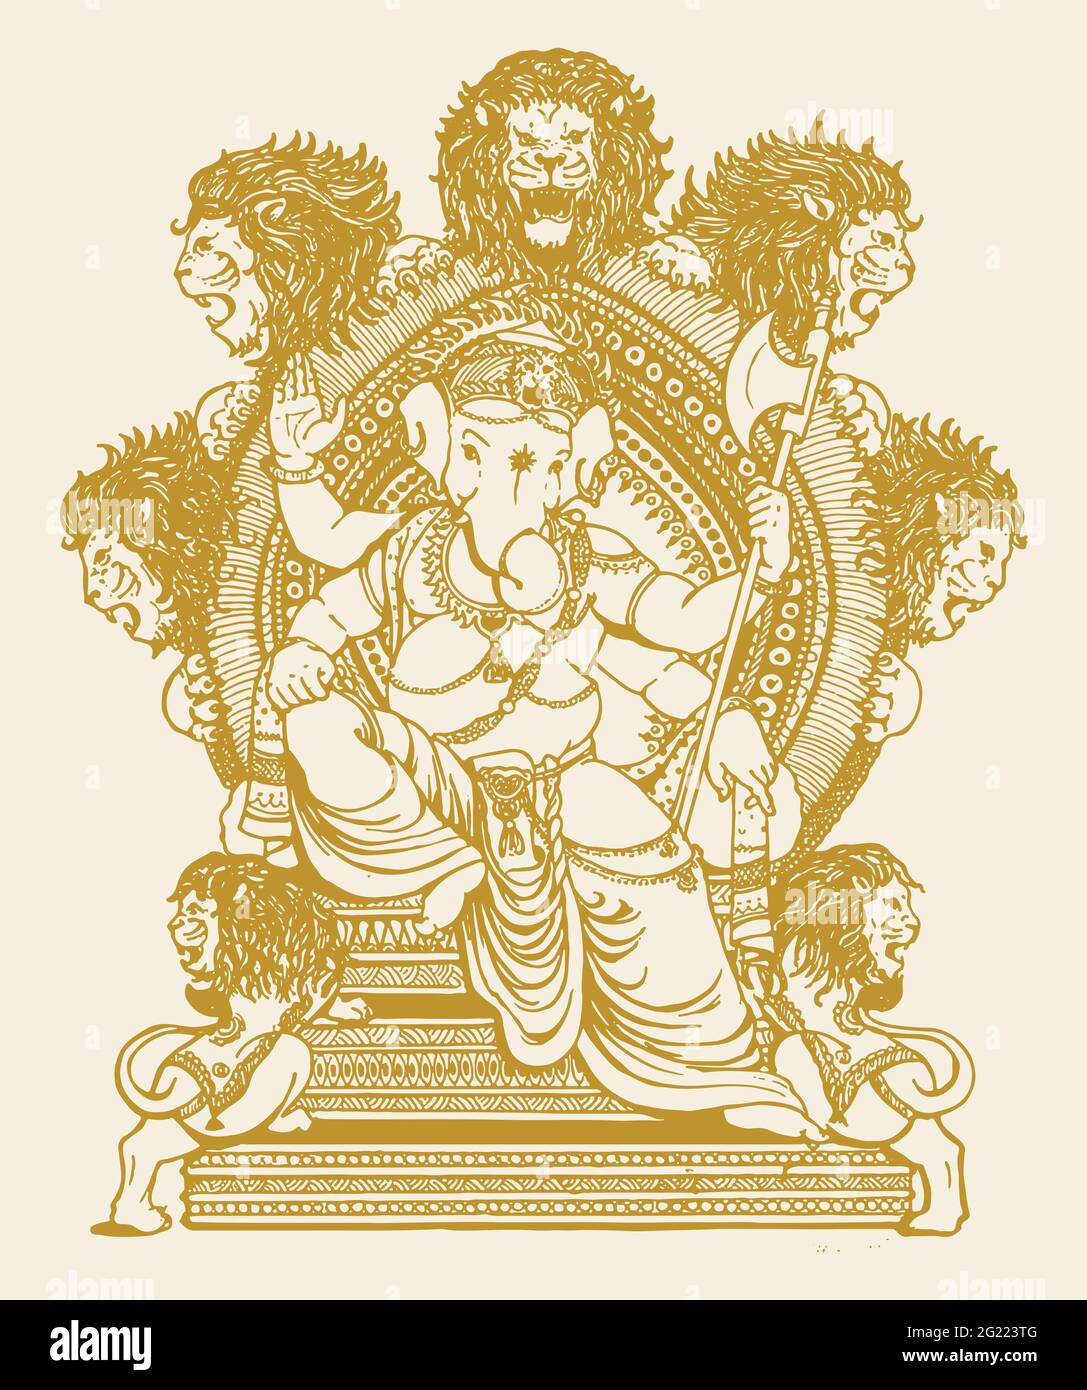 Drawing or sketch of Lord Ganesha sitting on a throne with lions ...